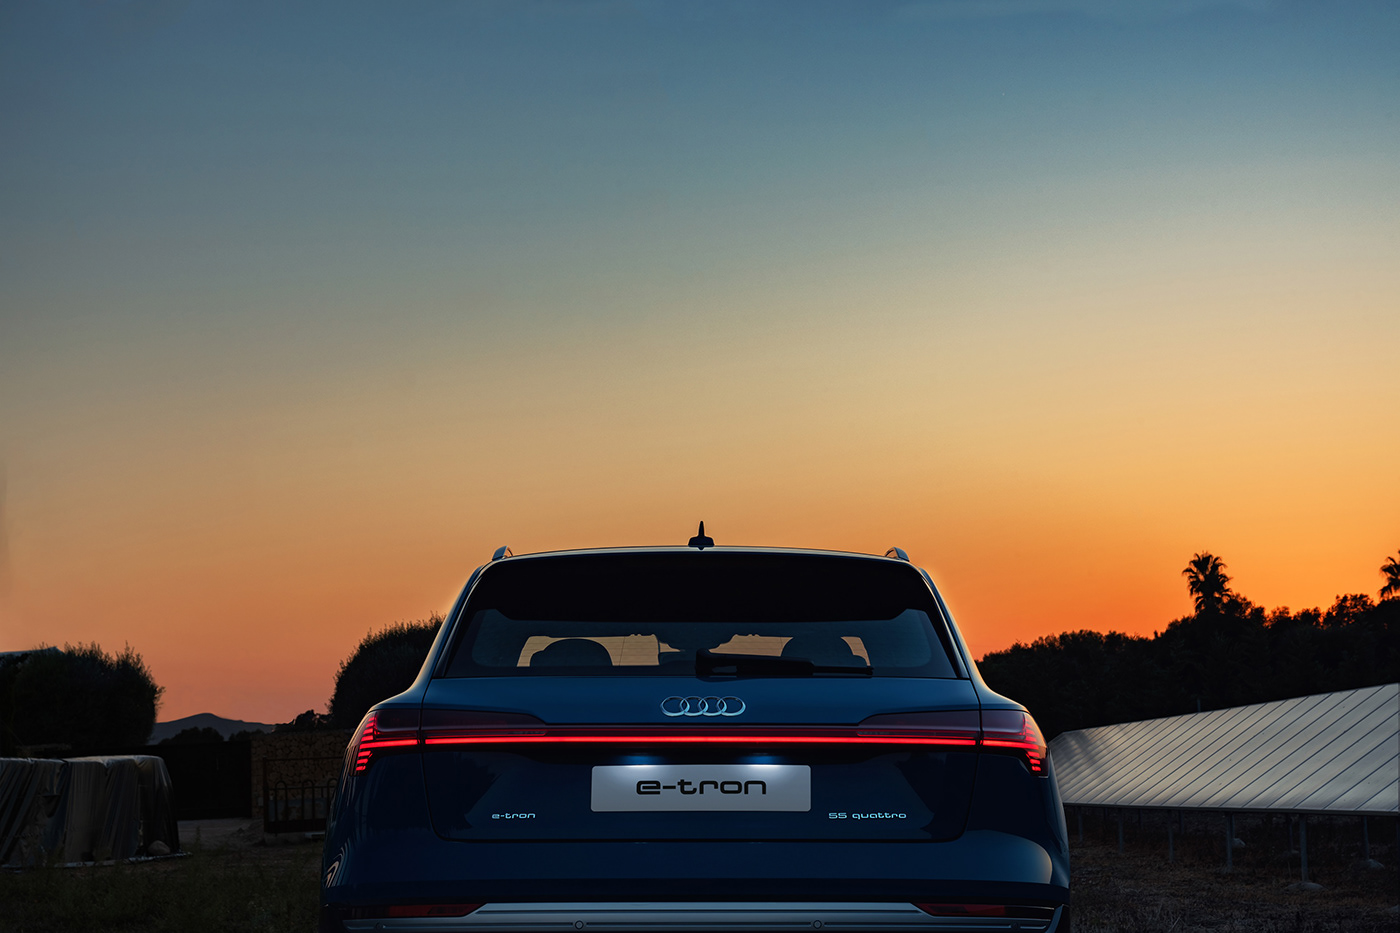 Audi e-tron sunset shot by Dean Wright Photography in Solar Farm. More on deanwrightautomotive.com